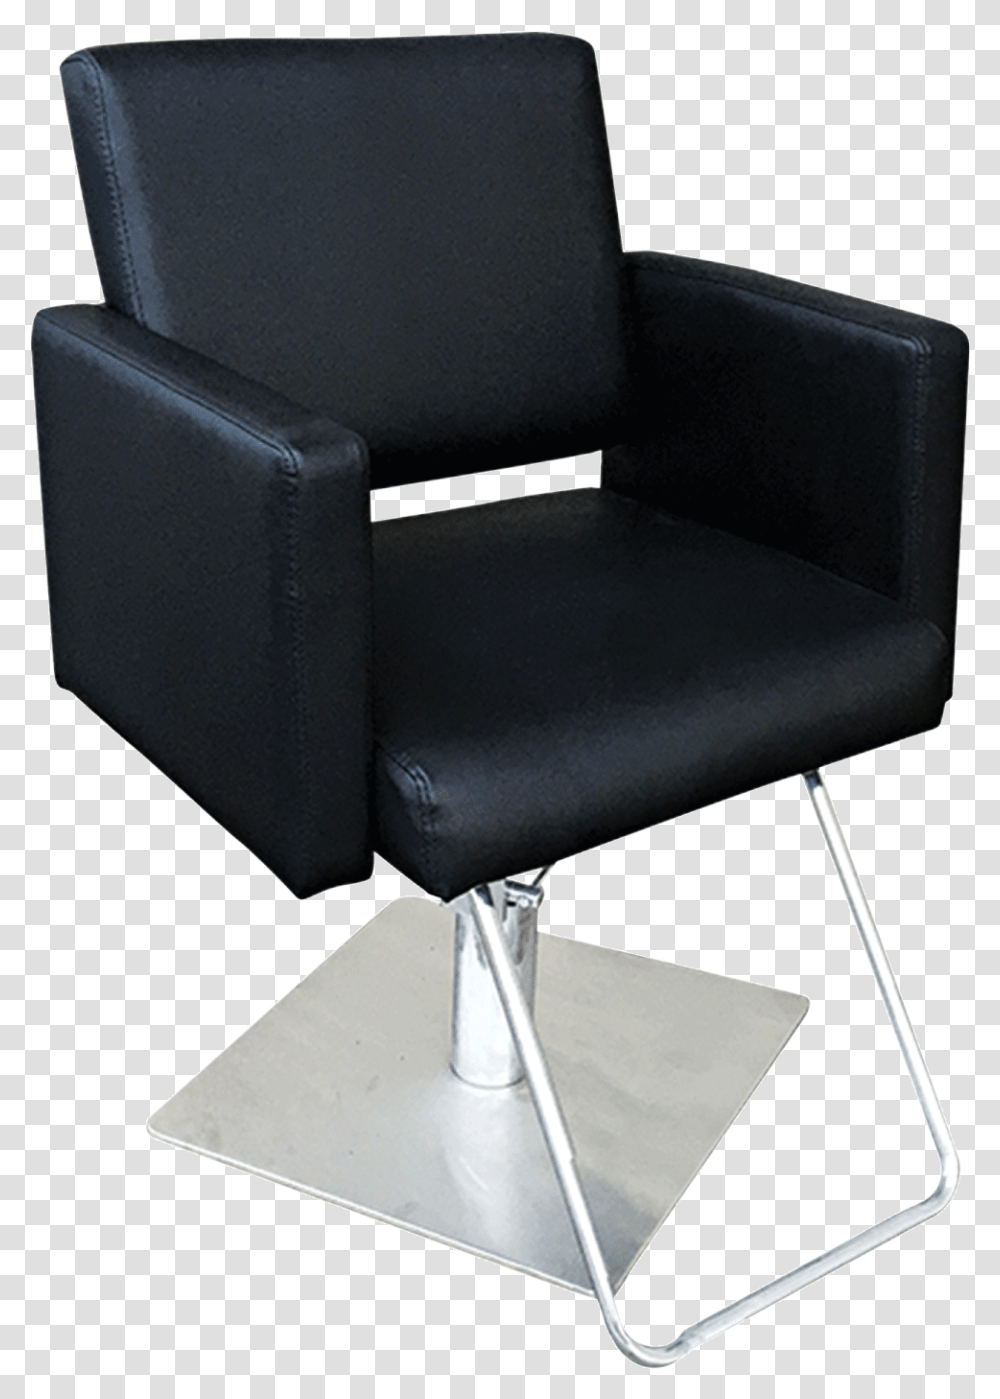 Cosmoprof Salon Chairs, Furniture, Armchair Transparent Png